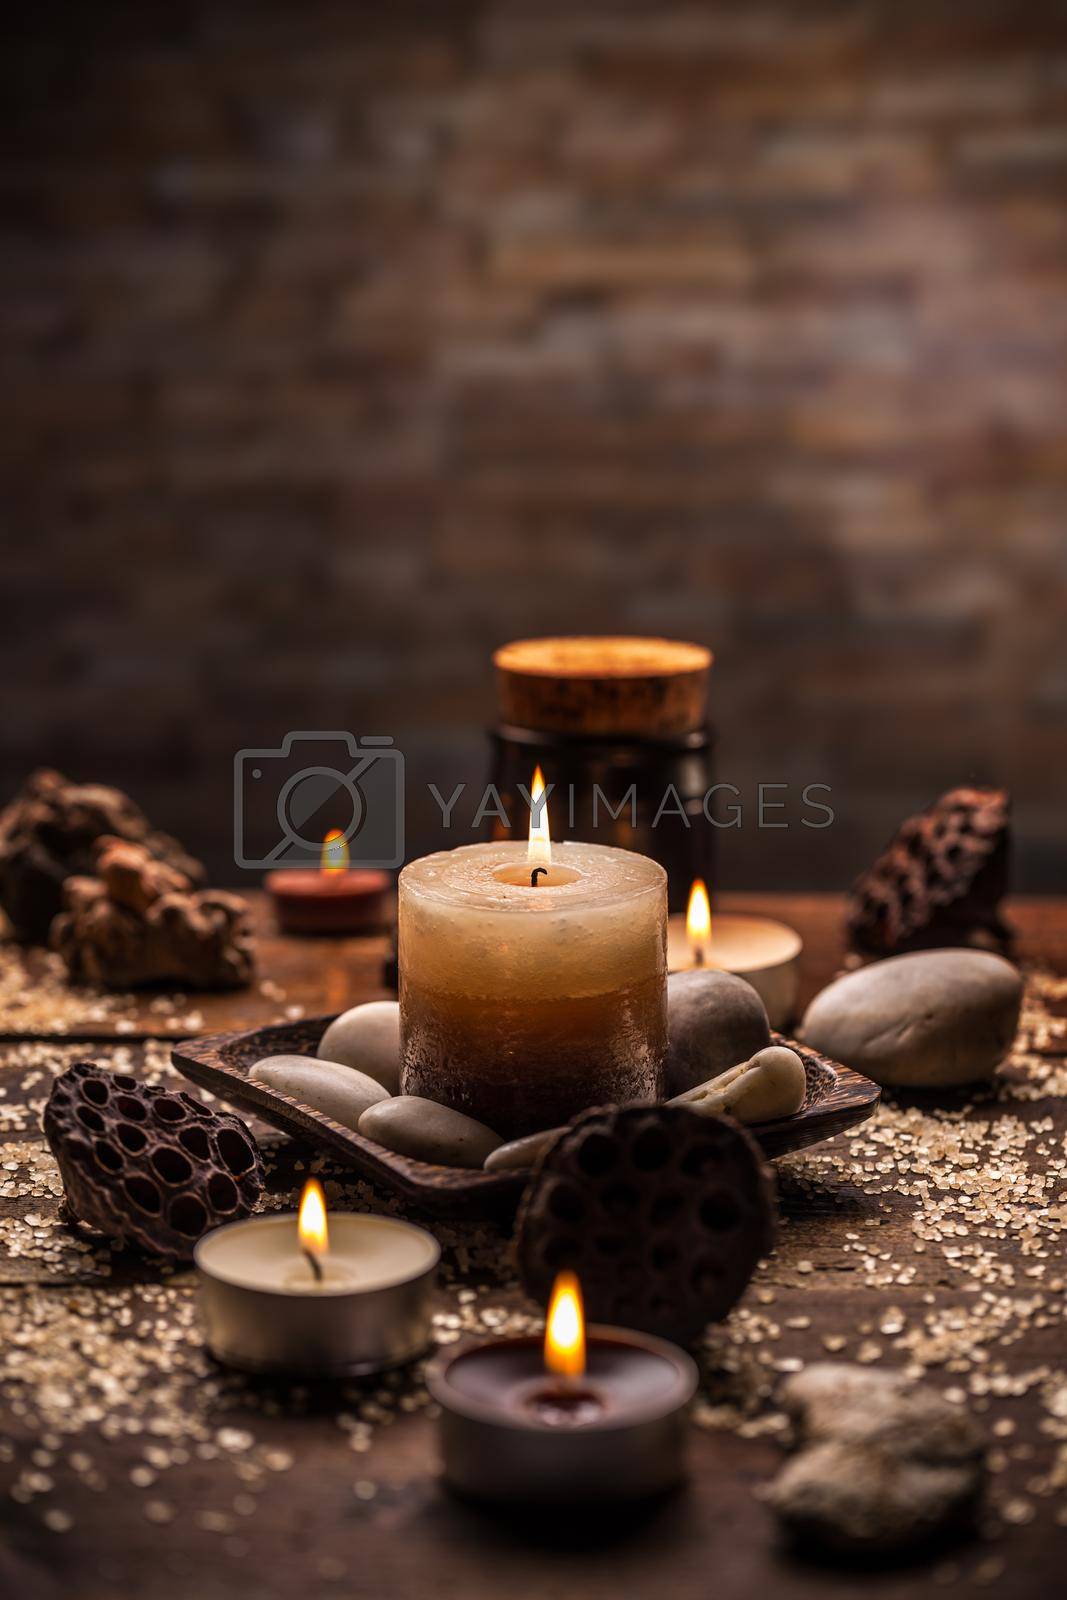 Spa and wellness setting with burning candles